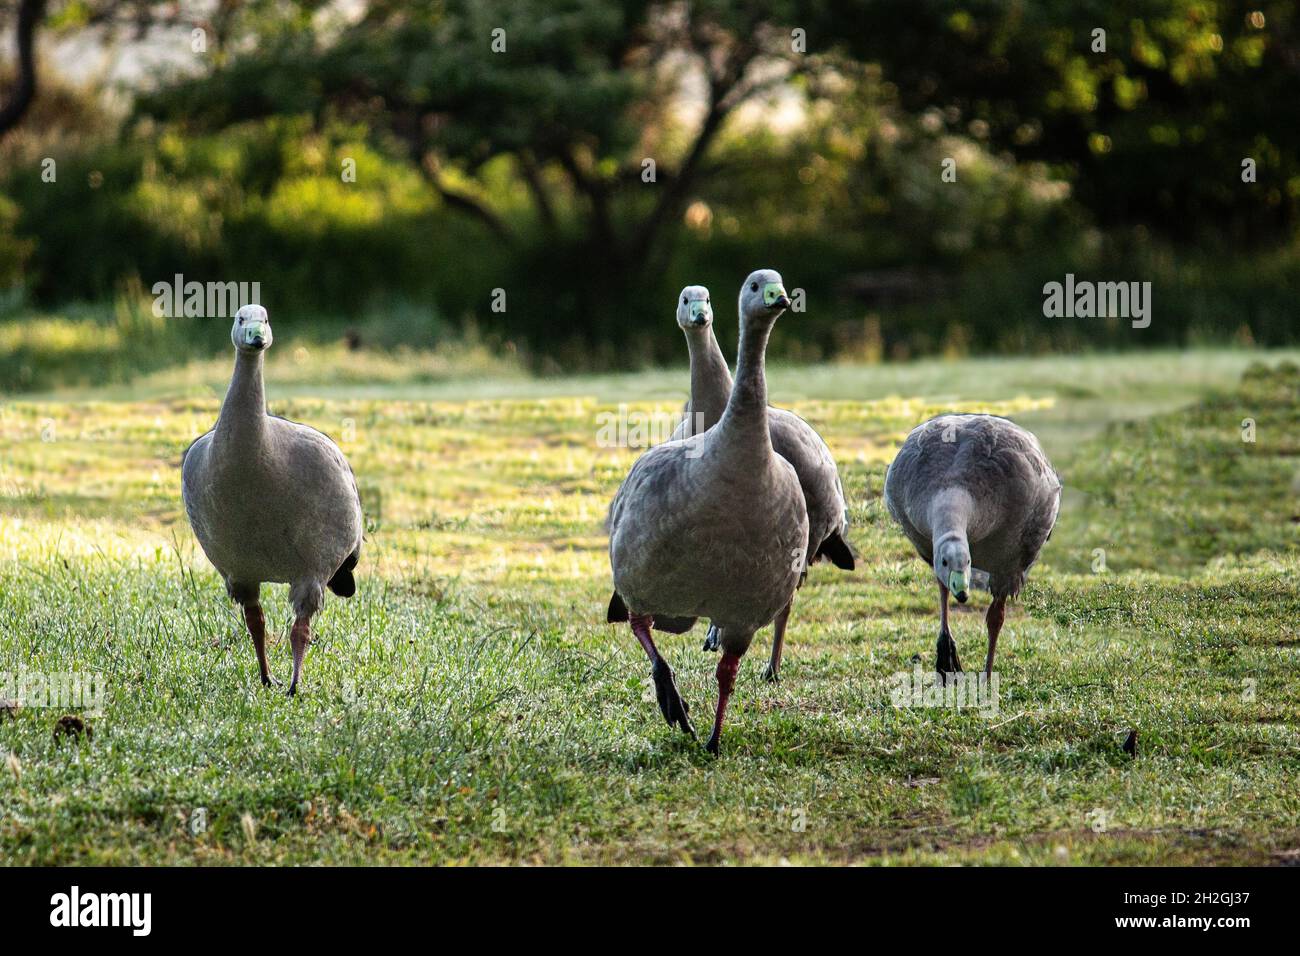 Native Australian Birds Cape Barren Geese walking along grass with trees in background Stock Photo